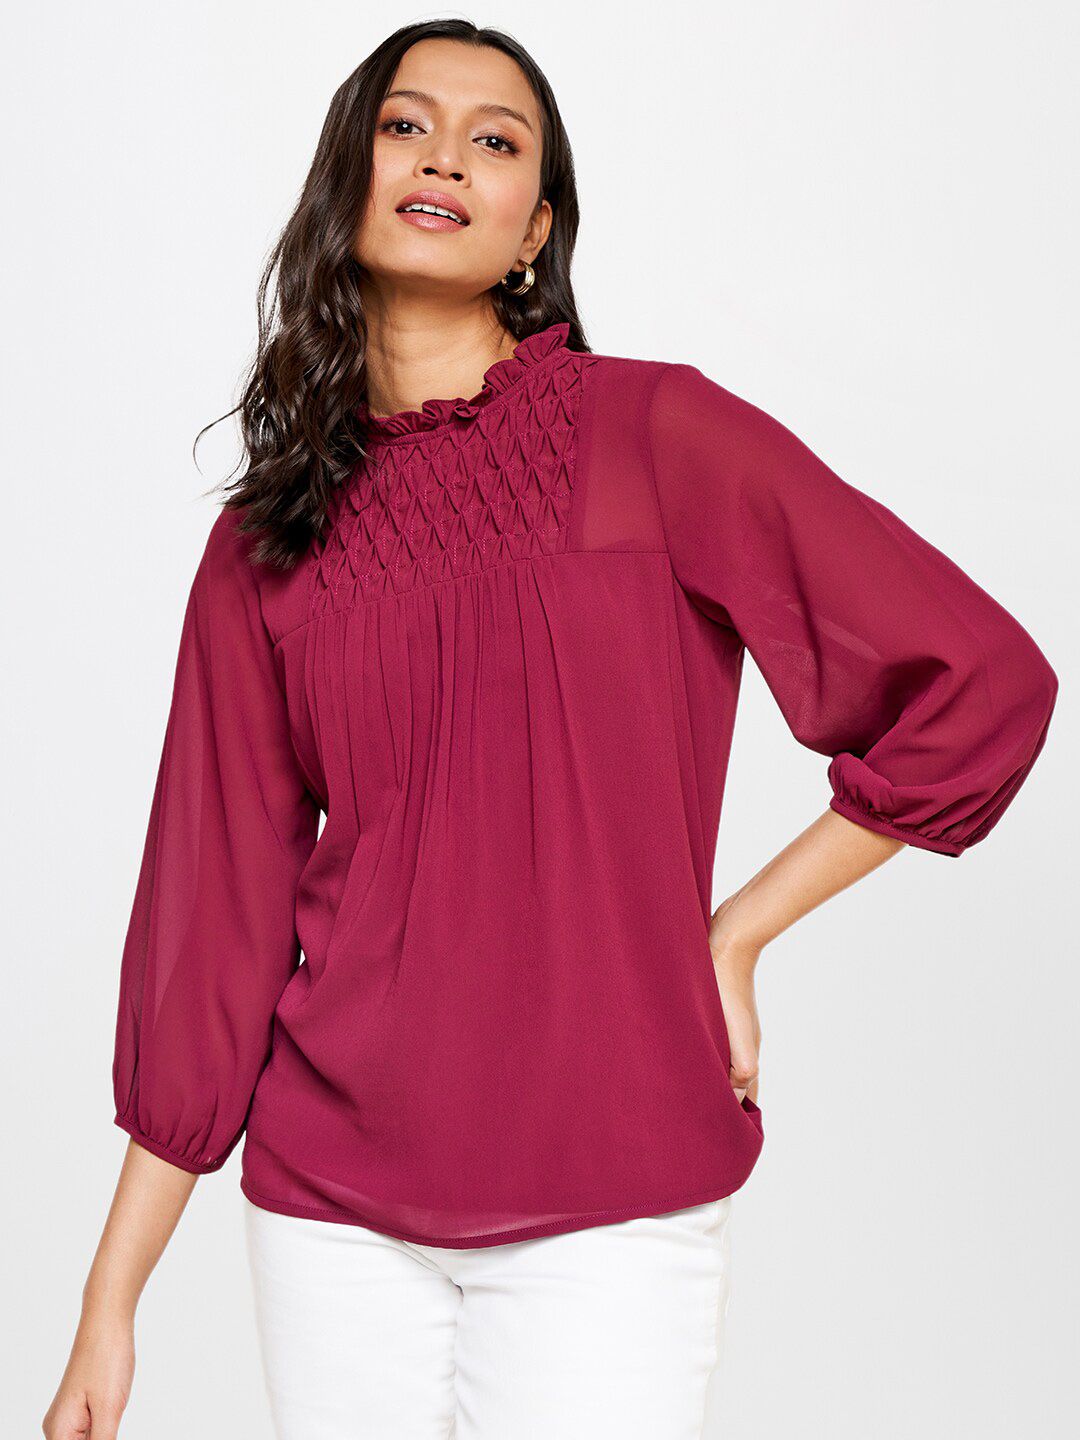 AND Long Sleeves Round NeckTop Price in India